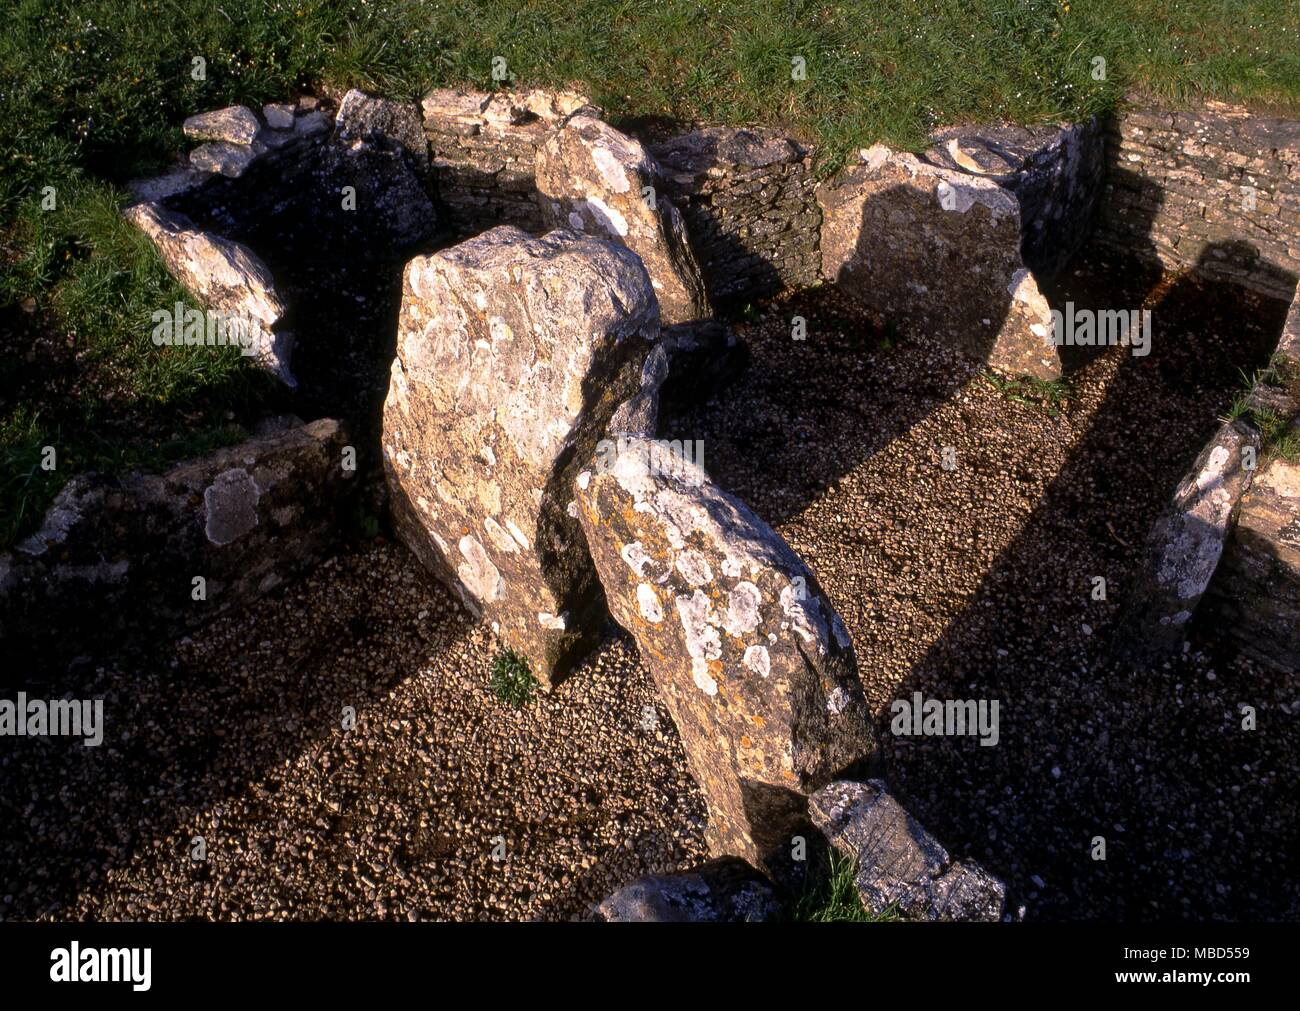 The neolithic long barrow at Nympsfield, near Stroud, Gloucestershire. Constructed c.2,800 BC. The capstones have been removed. Bones of 13 people were found inside the barrow. Stock Photo